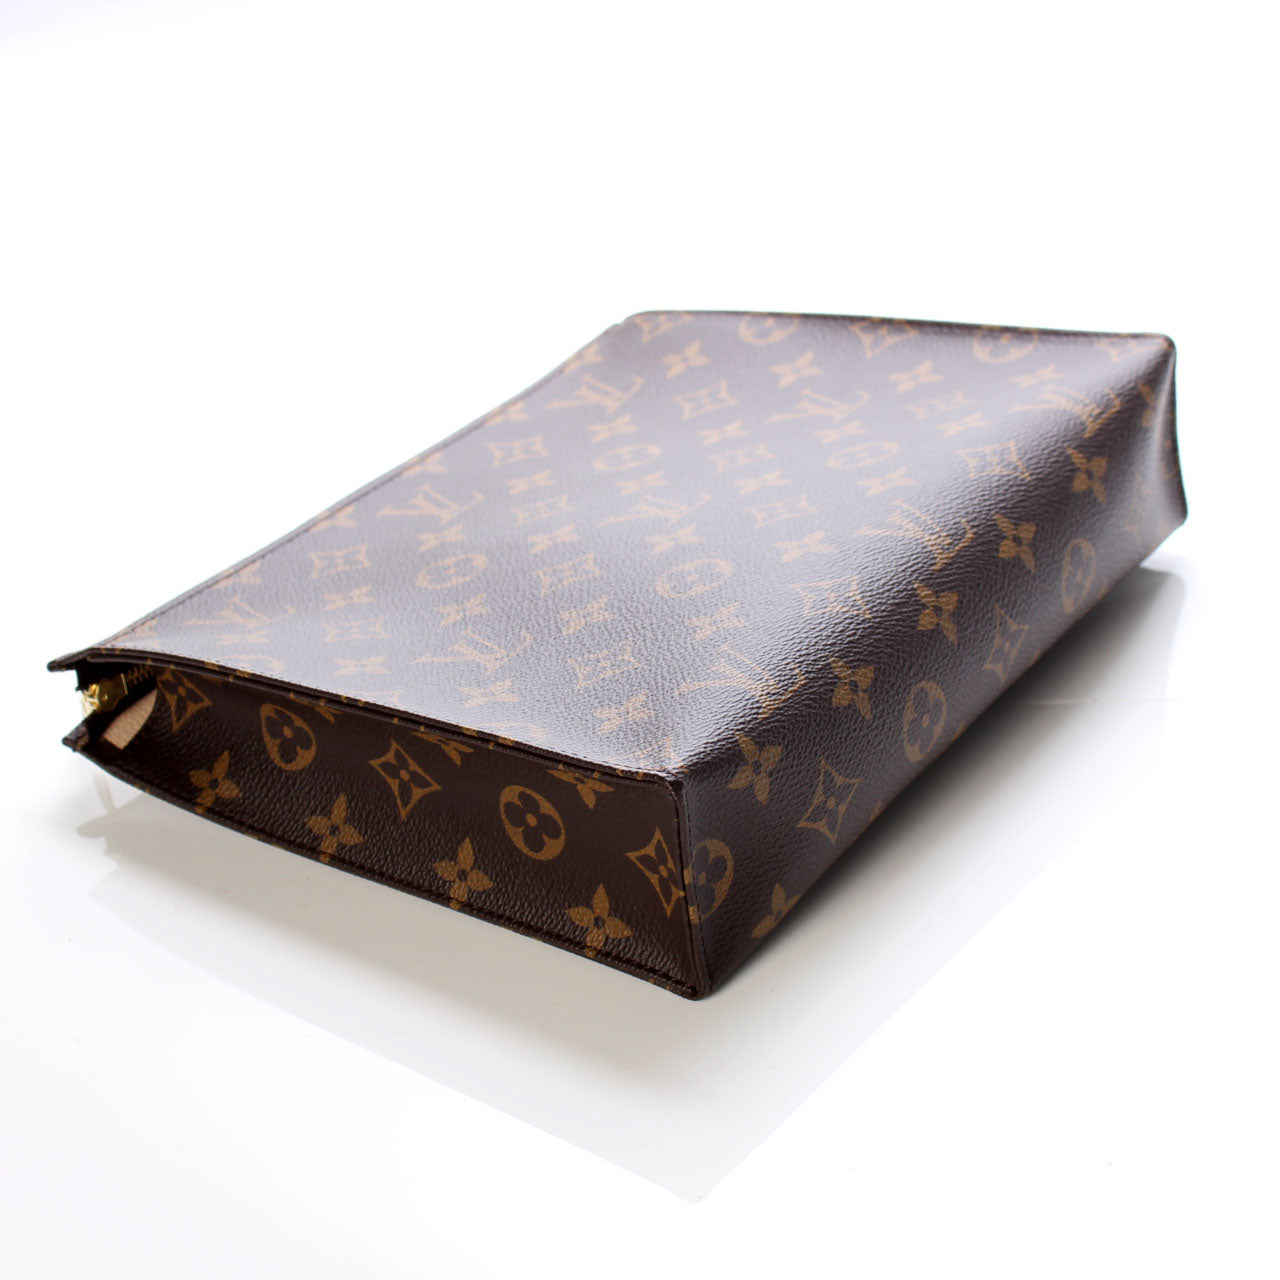 Handmade Leather Monogram Toiletry 26 Pouch – LV PL